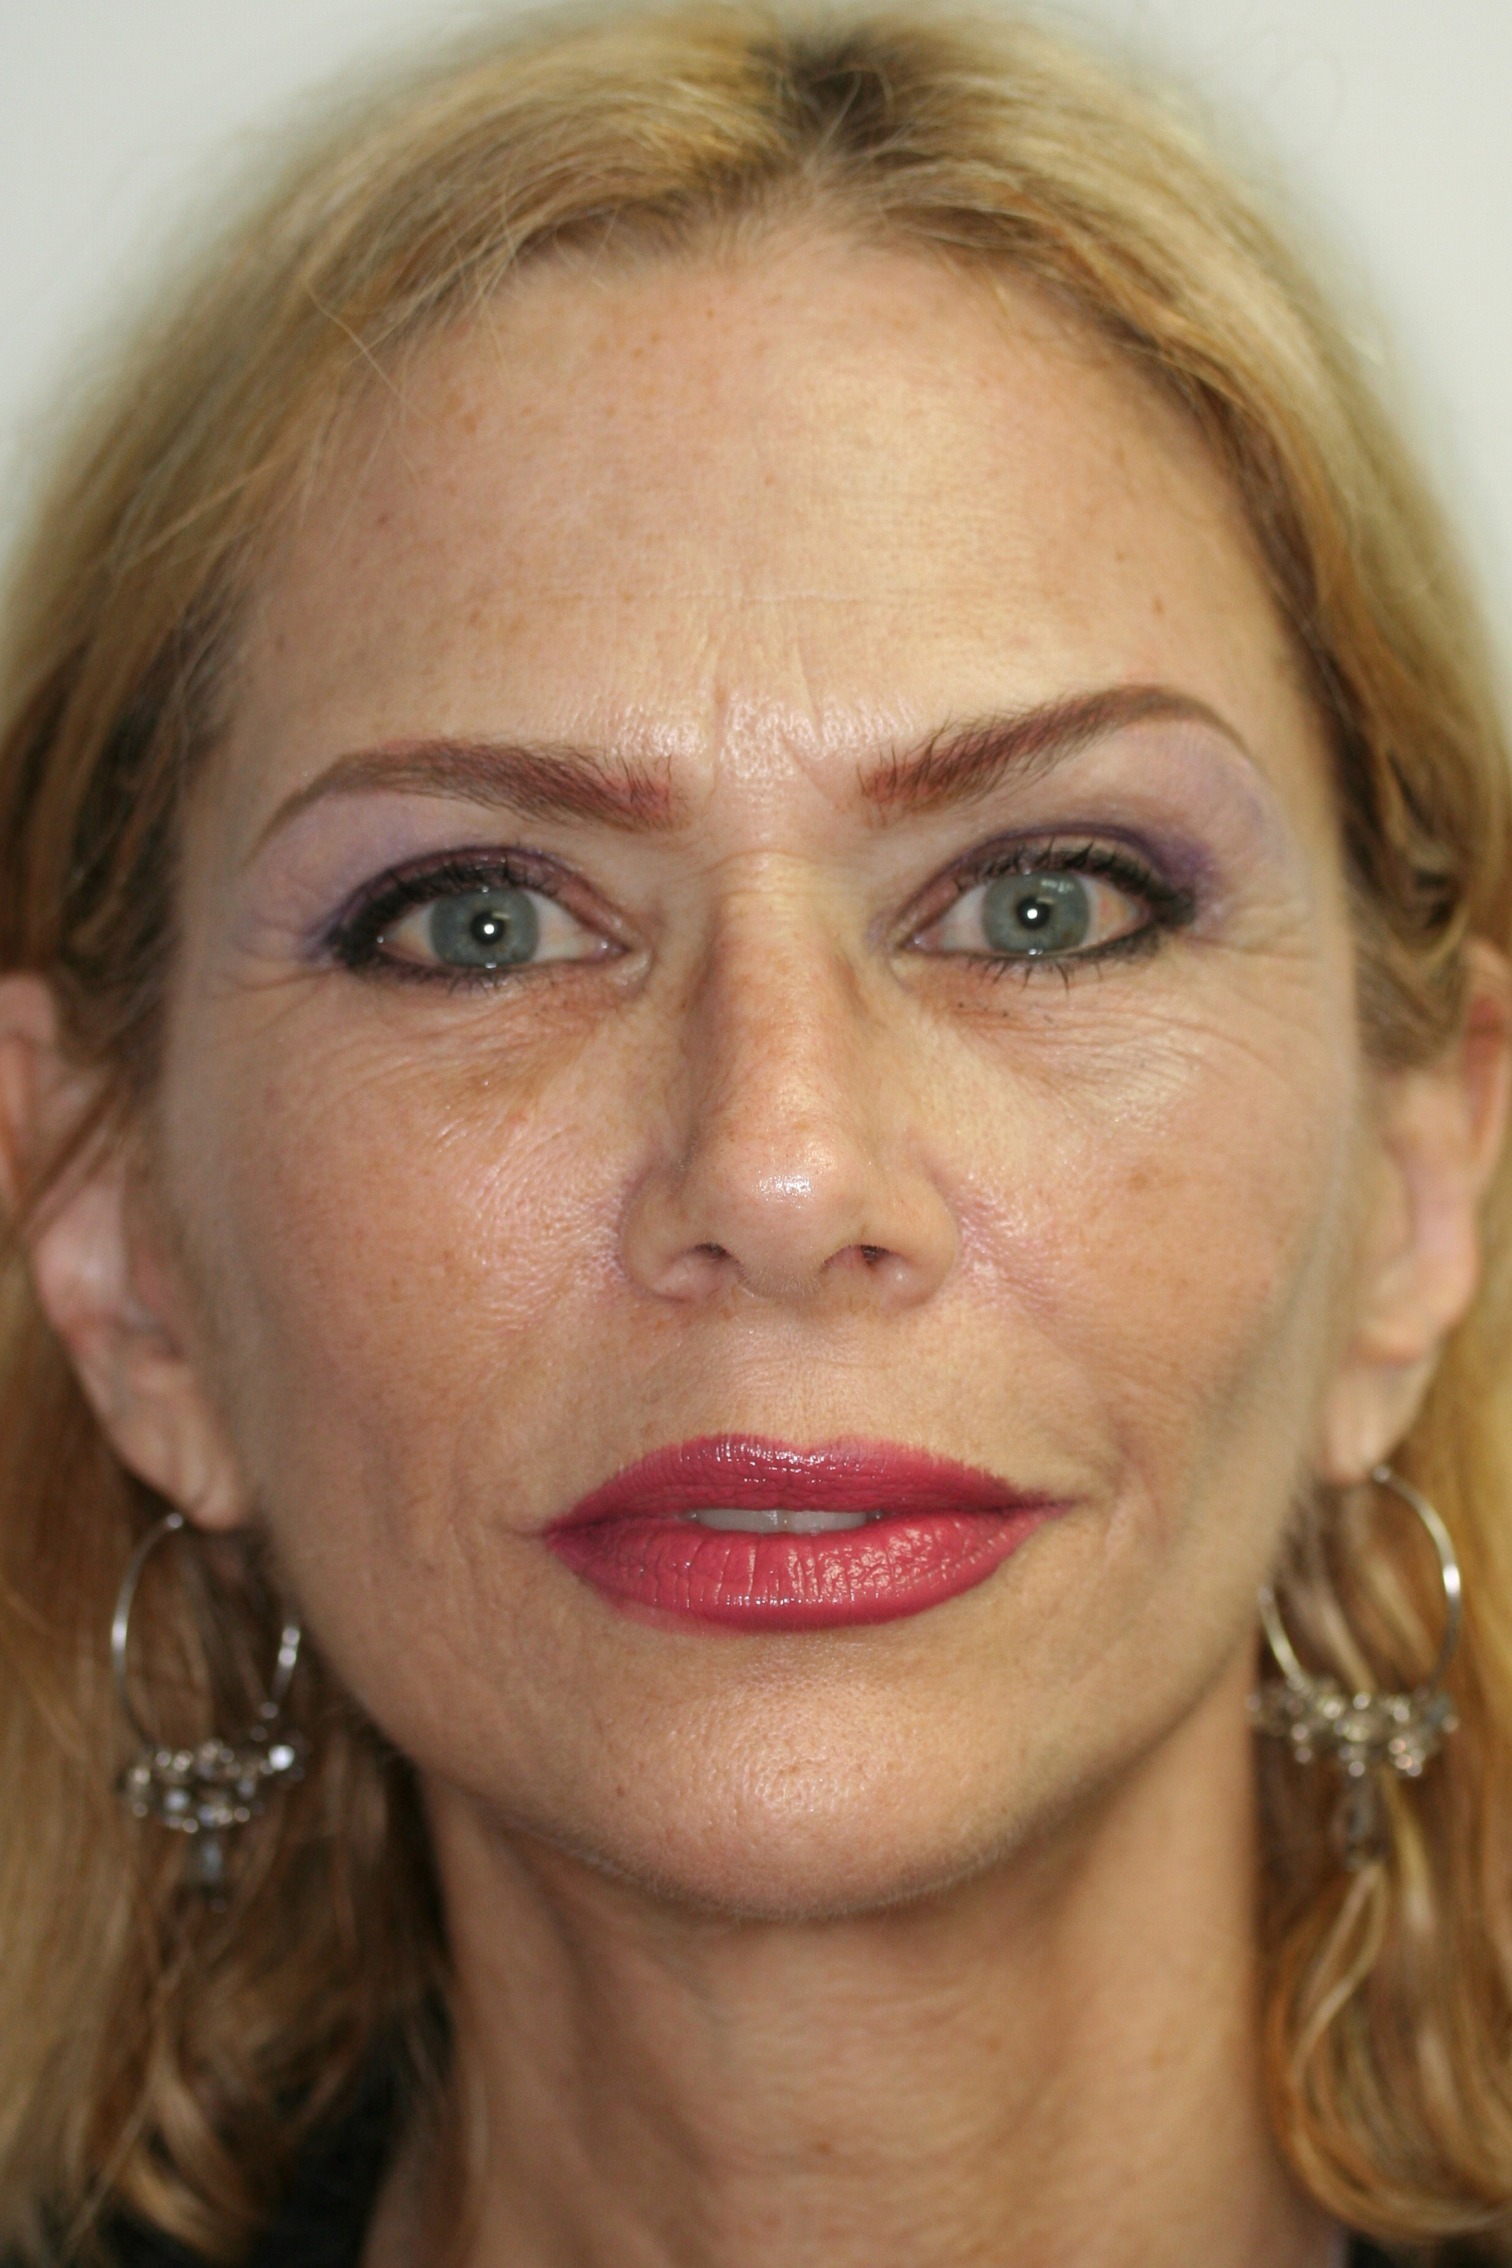 Facelift - Before & After